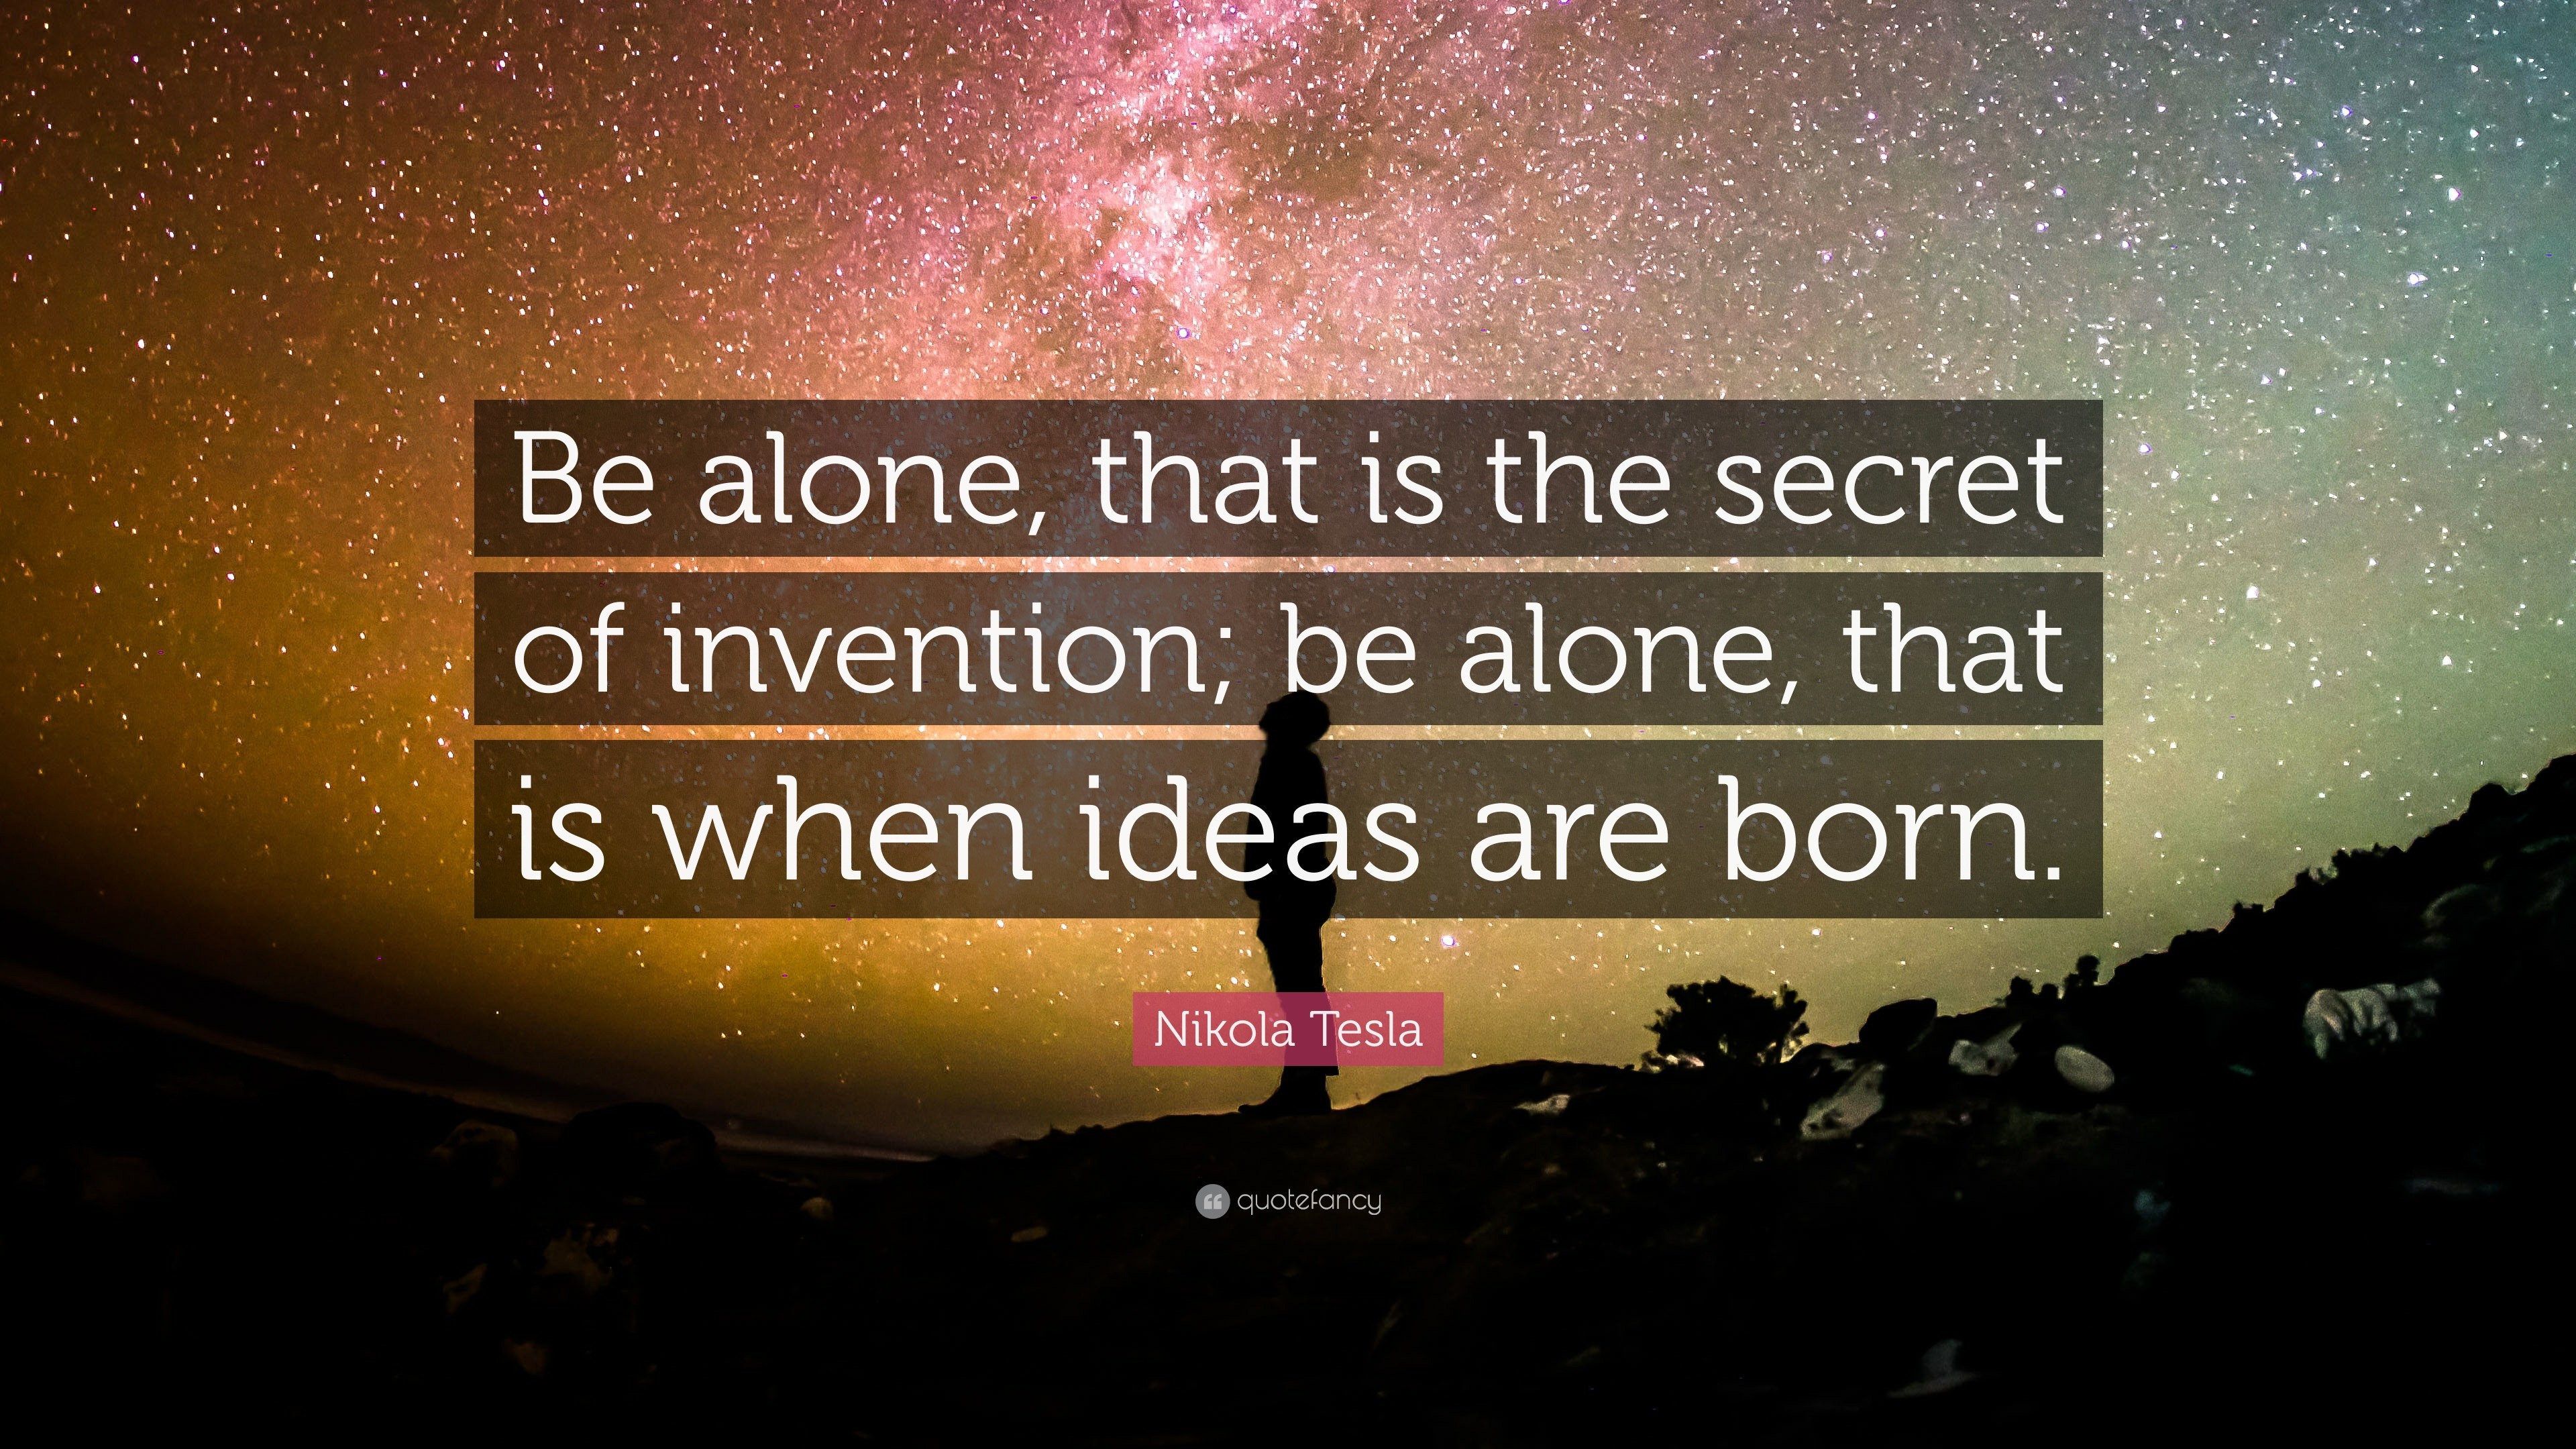 3840x2160 Nikola Tesla Quote: “Be alone, that is the secret of invention; be